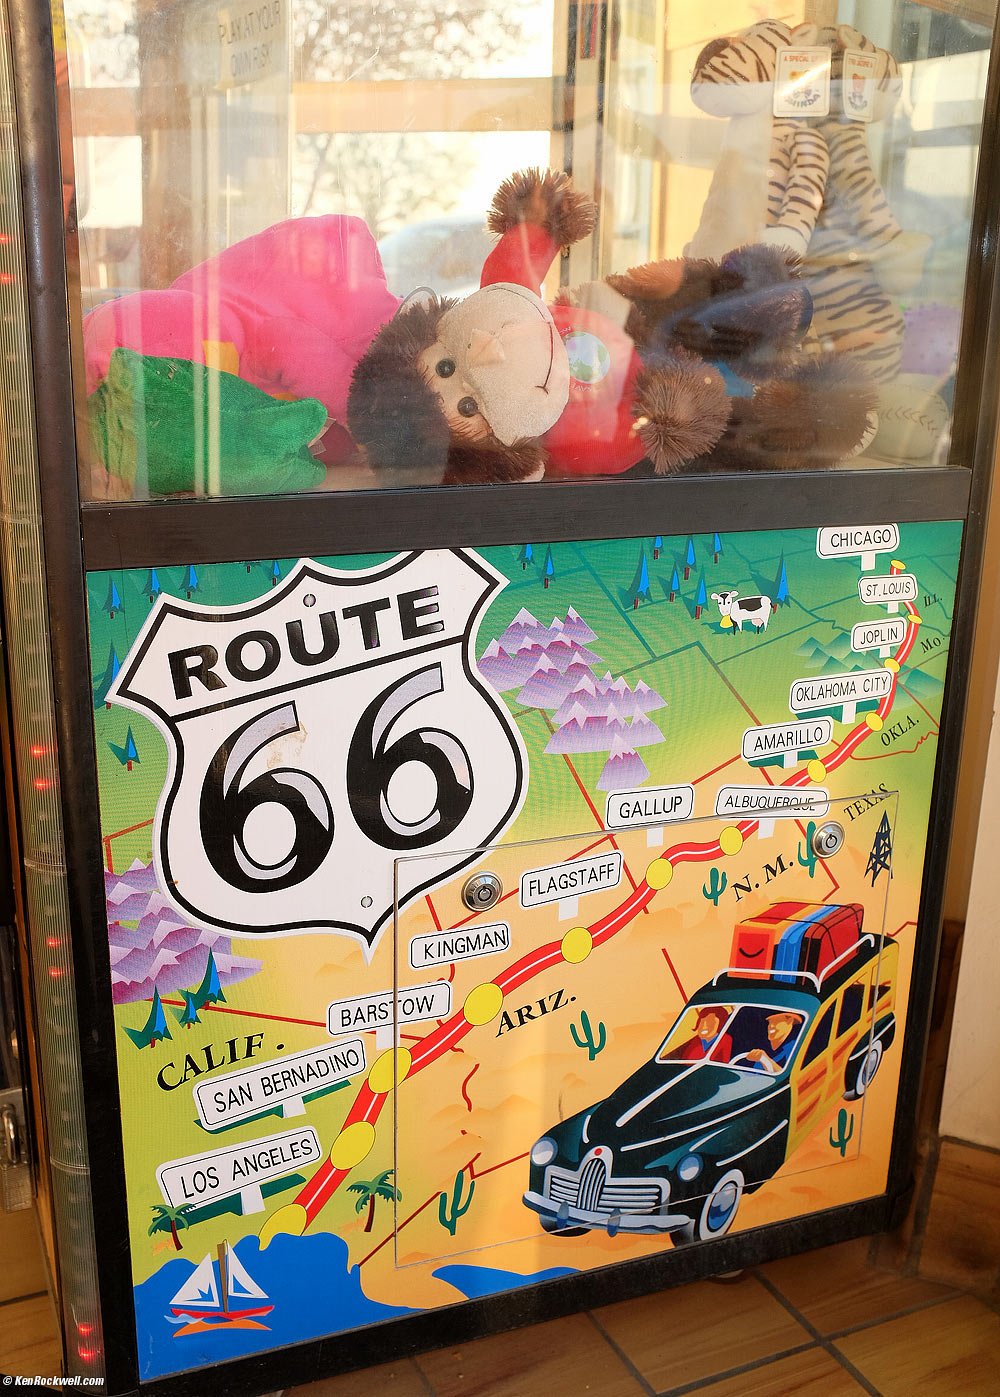 Route 66 As Seen At An I-5 Truckstop